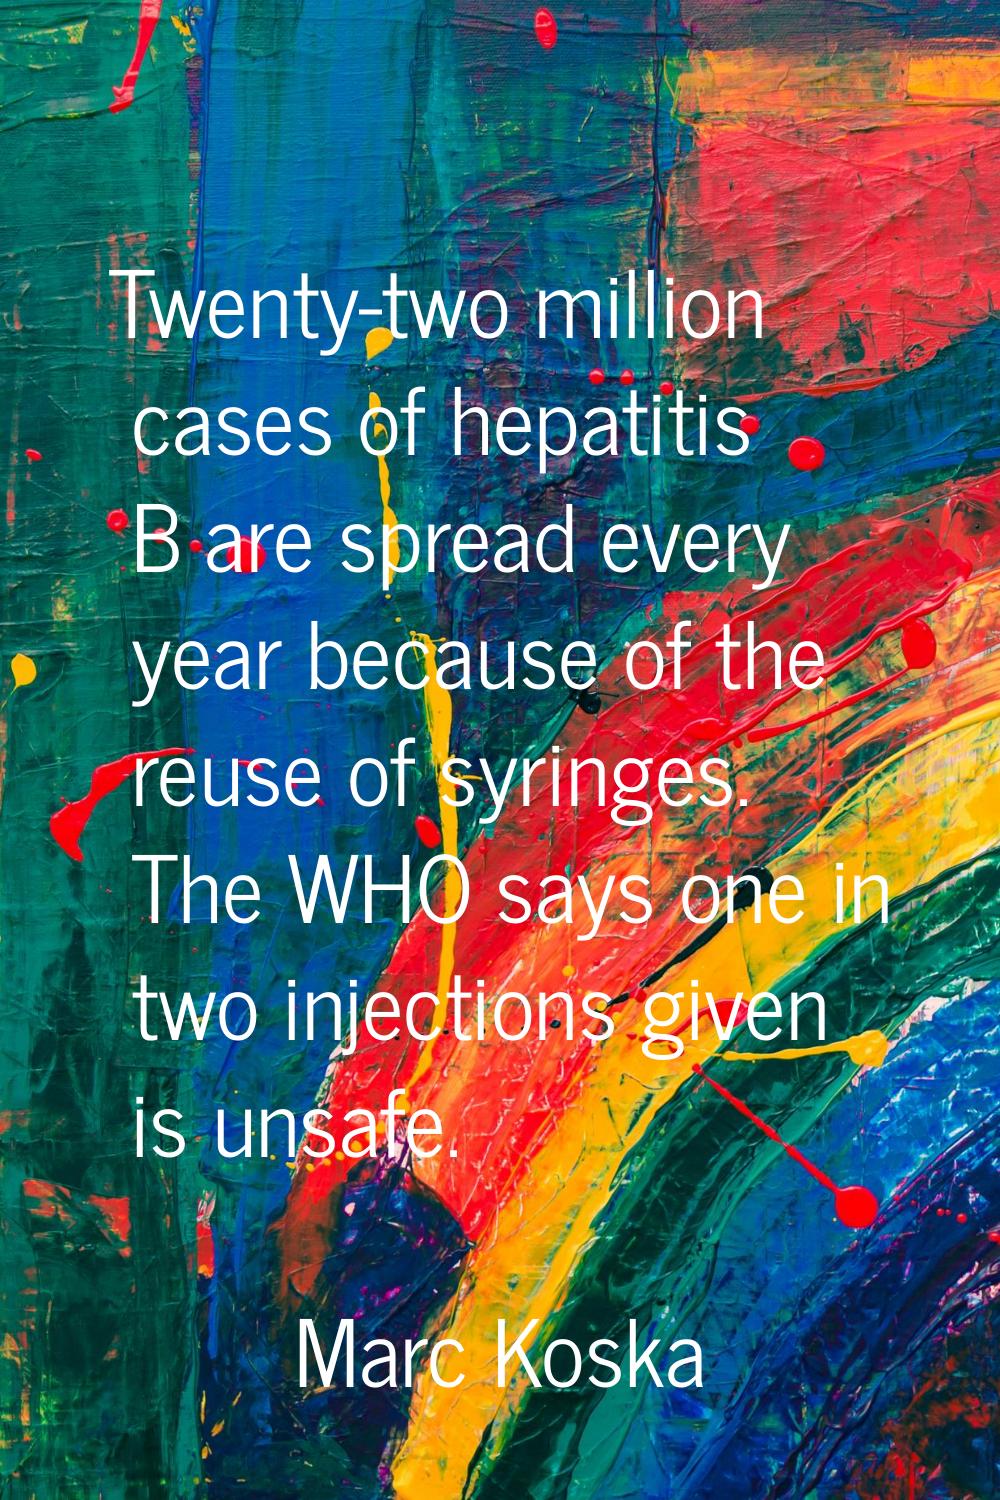 Twenty-two million cases of hepatitis B are spread every year because of the reuse of syringes. The